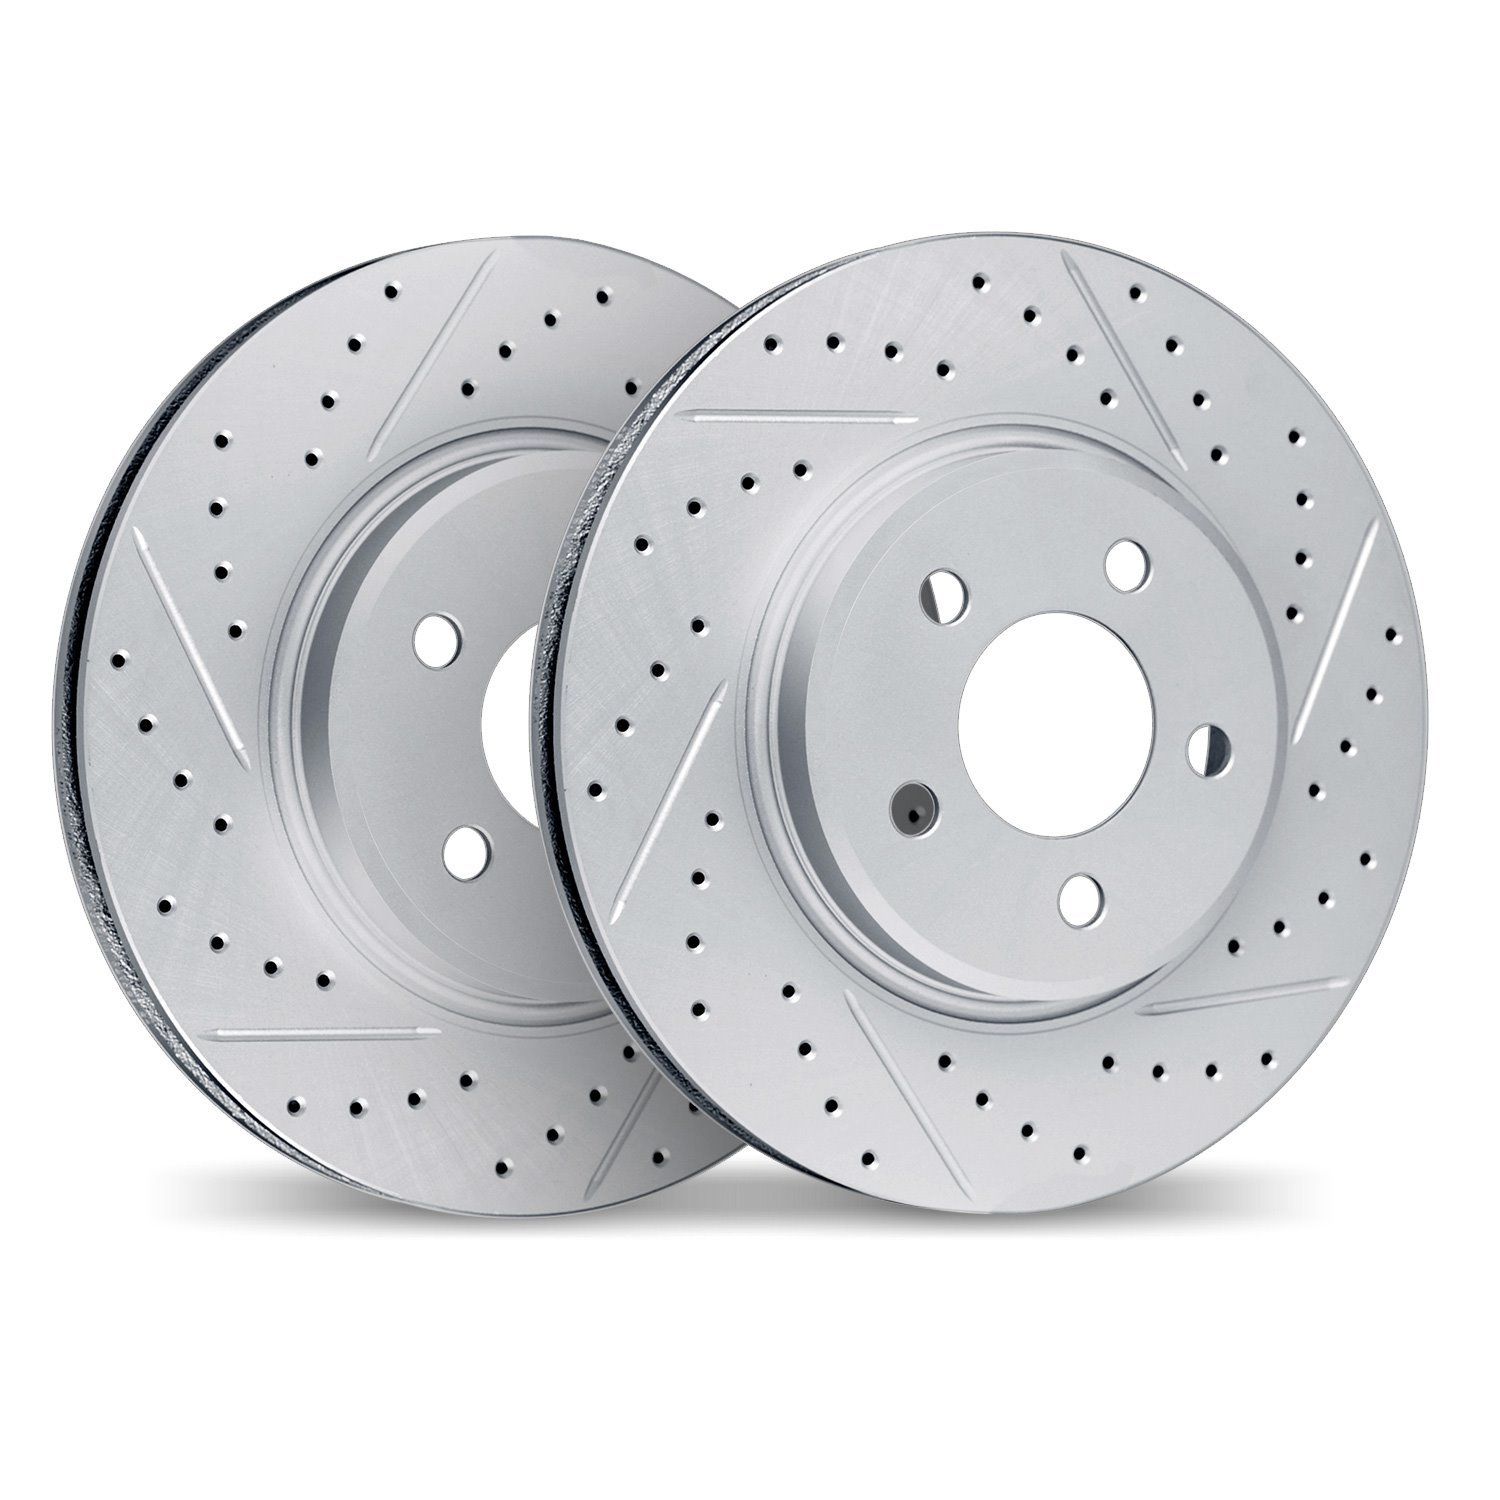 2002-58068 Geoperformance Drilled/Slotted Brake Rotors, Fits Select Acura/Honda, Position: Front